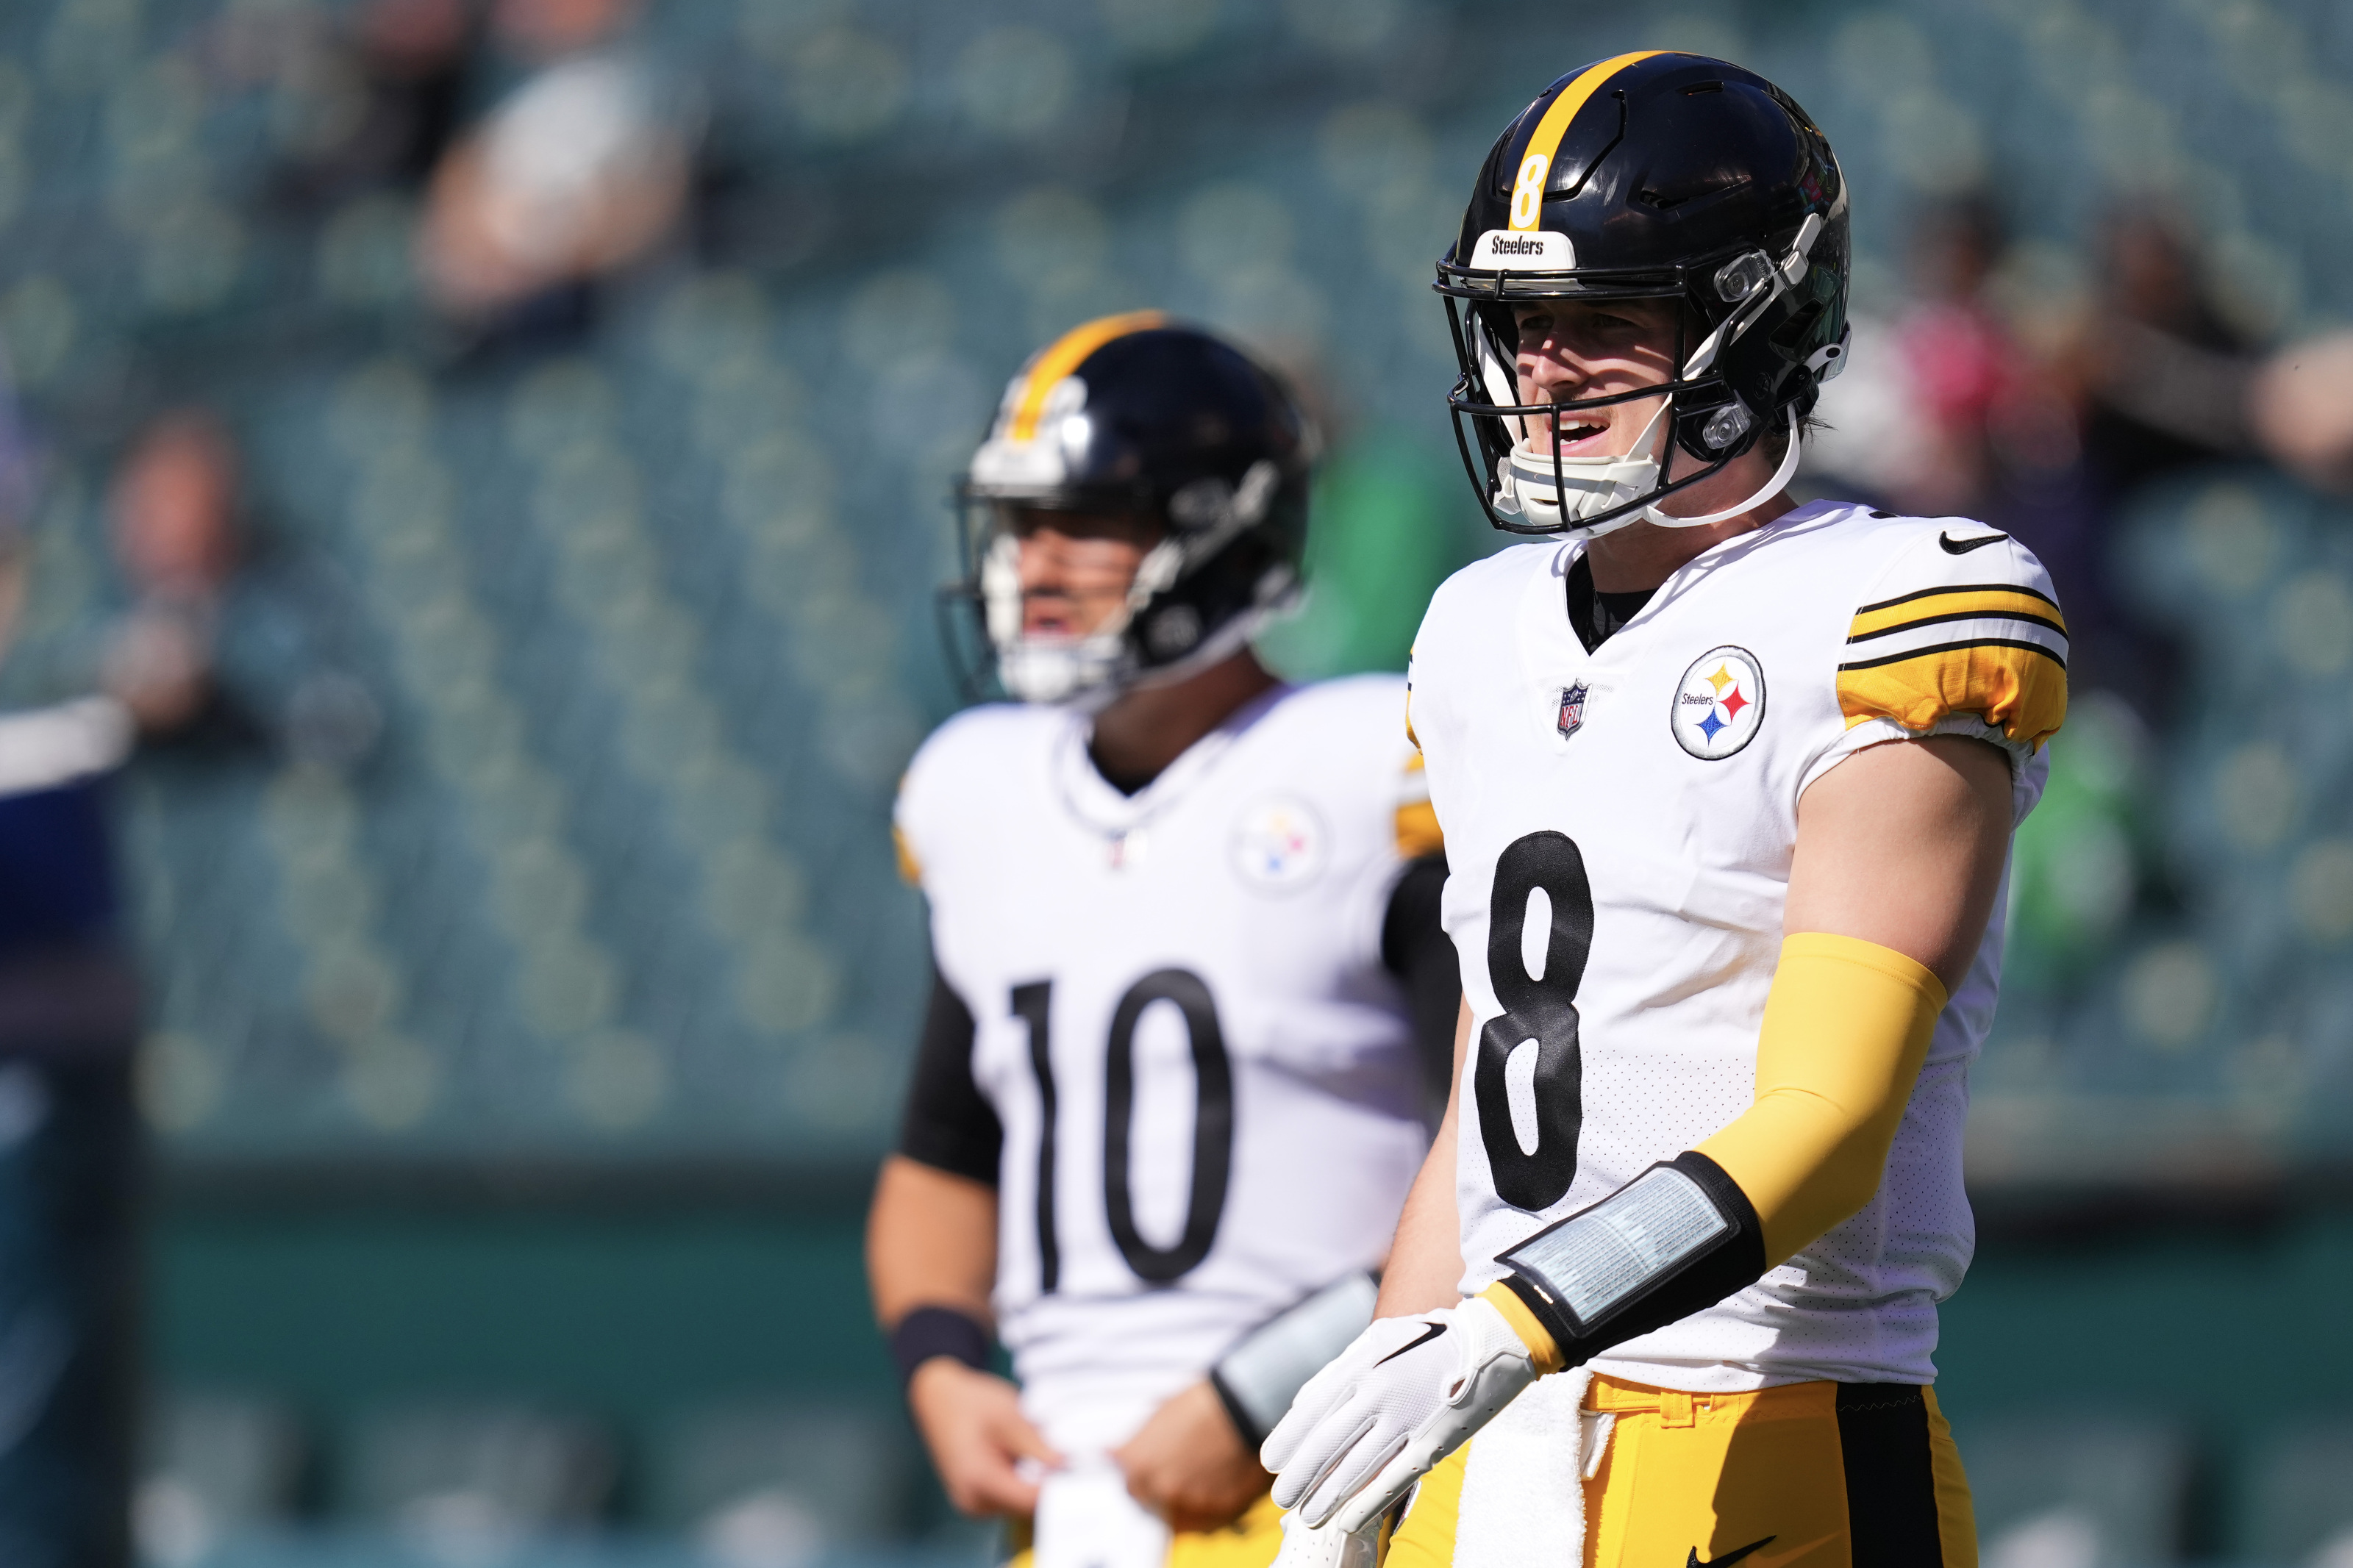 Mitch Trubisky's bad game makes Steelers fans appreciate Kenny Pickett